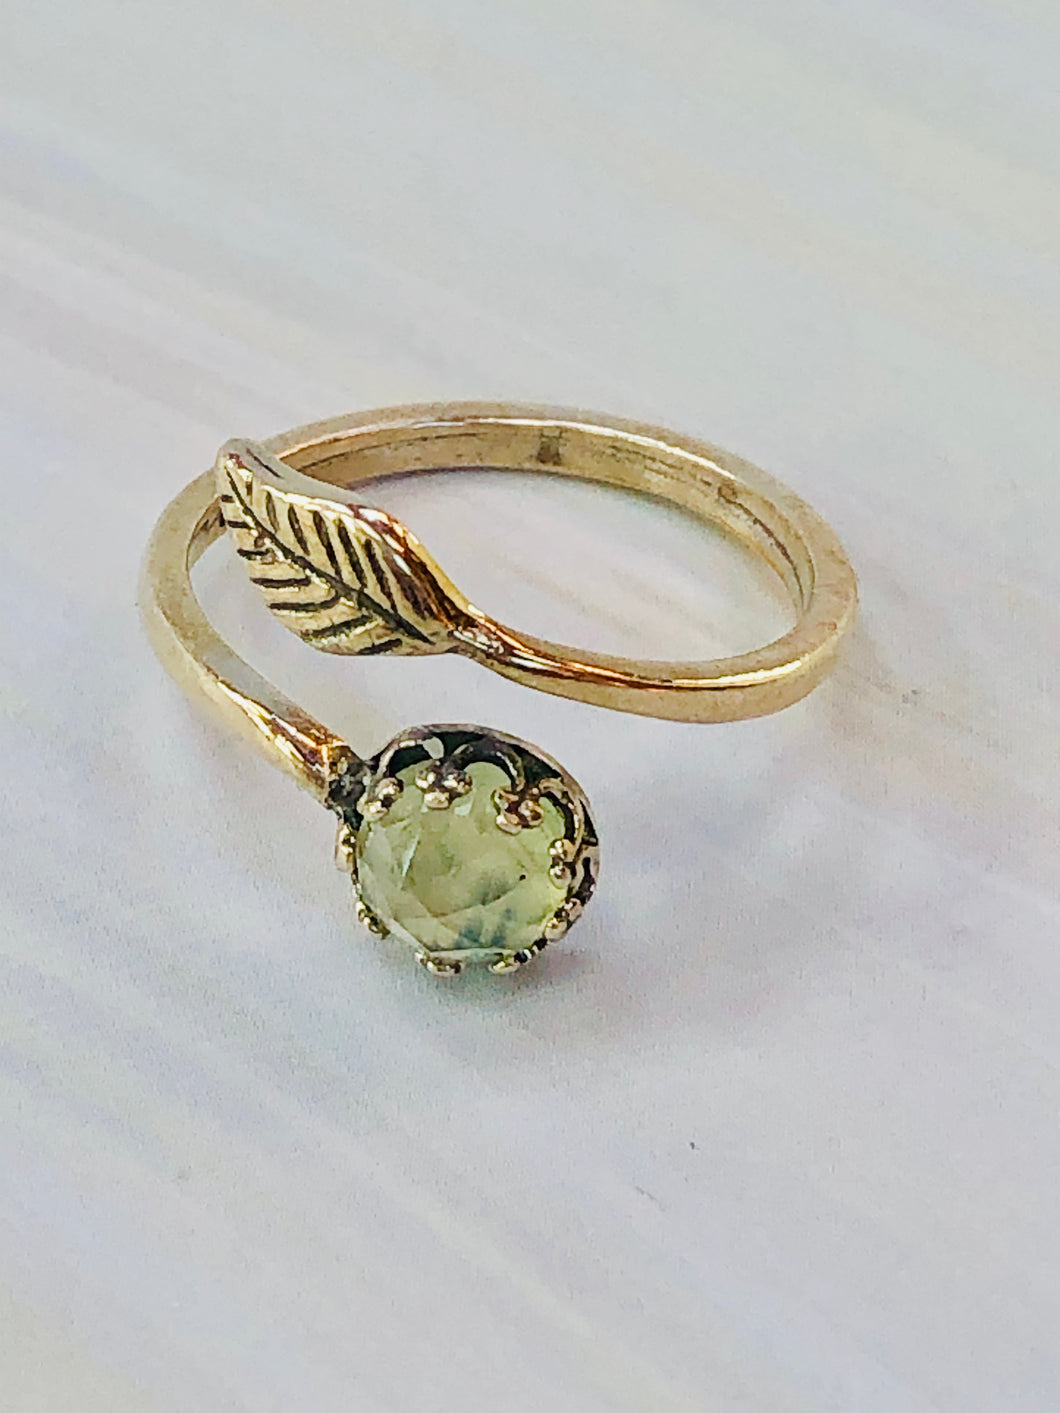 Faceted Prehnite Leaf Ring, Botanical jewelry collection